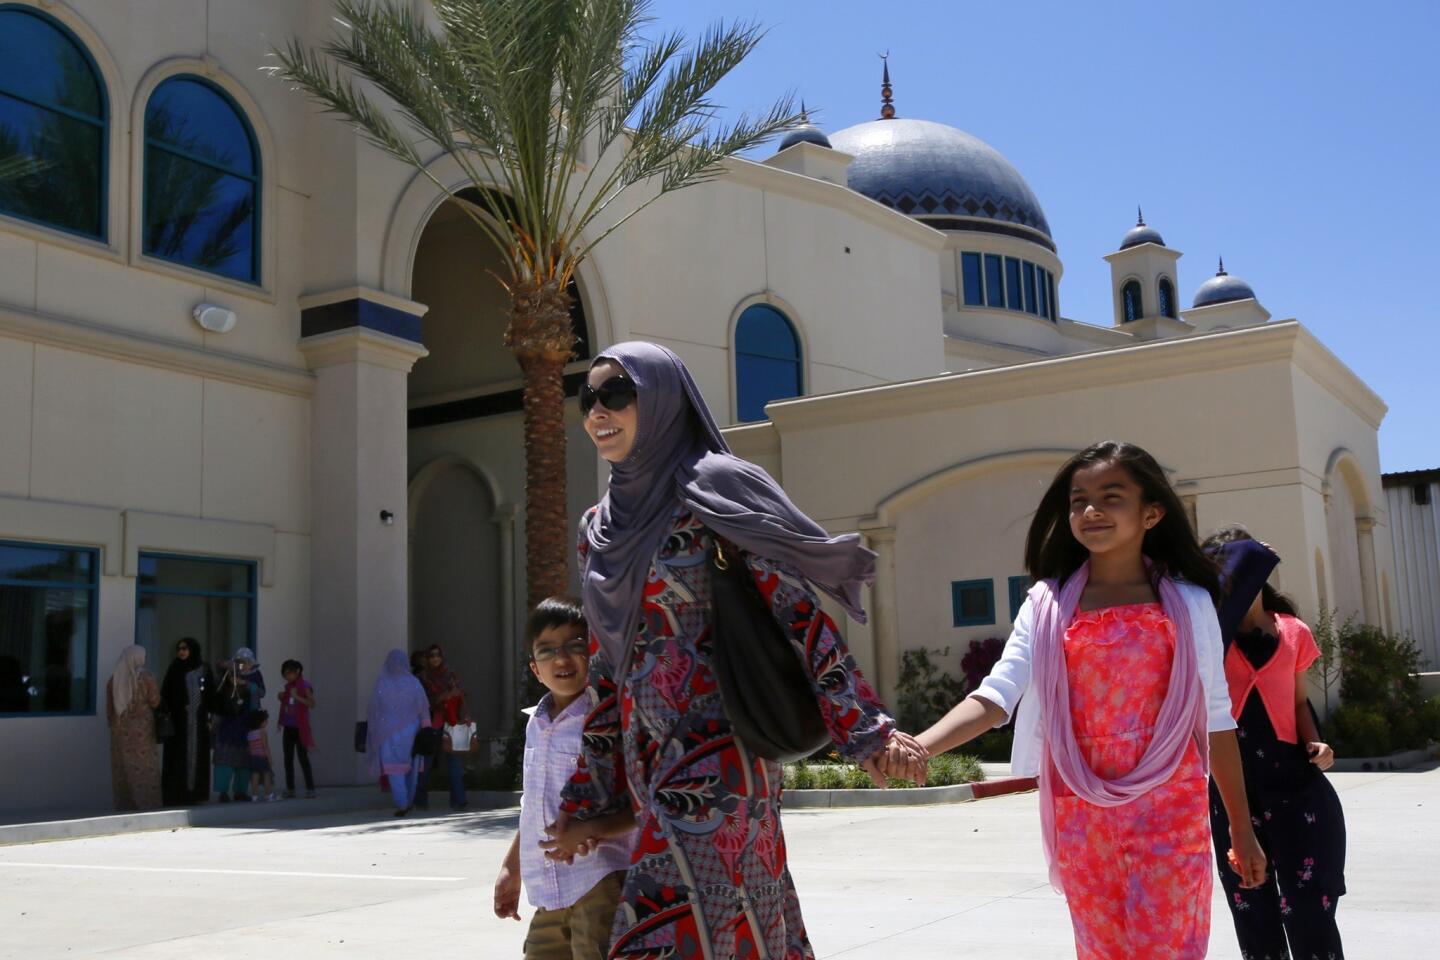 Anushe Khan and her children Yousuf, 5, left, Ayesha, 9, and Asma, 7, come out of the new mosque after attending Friday prayers.